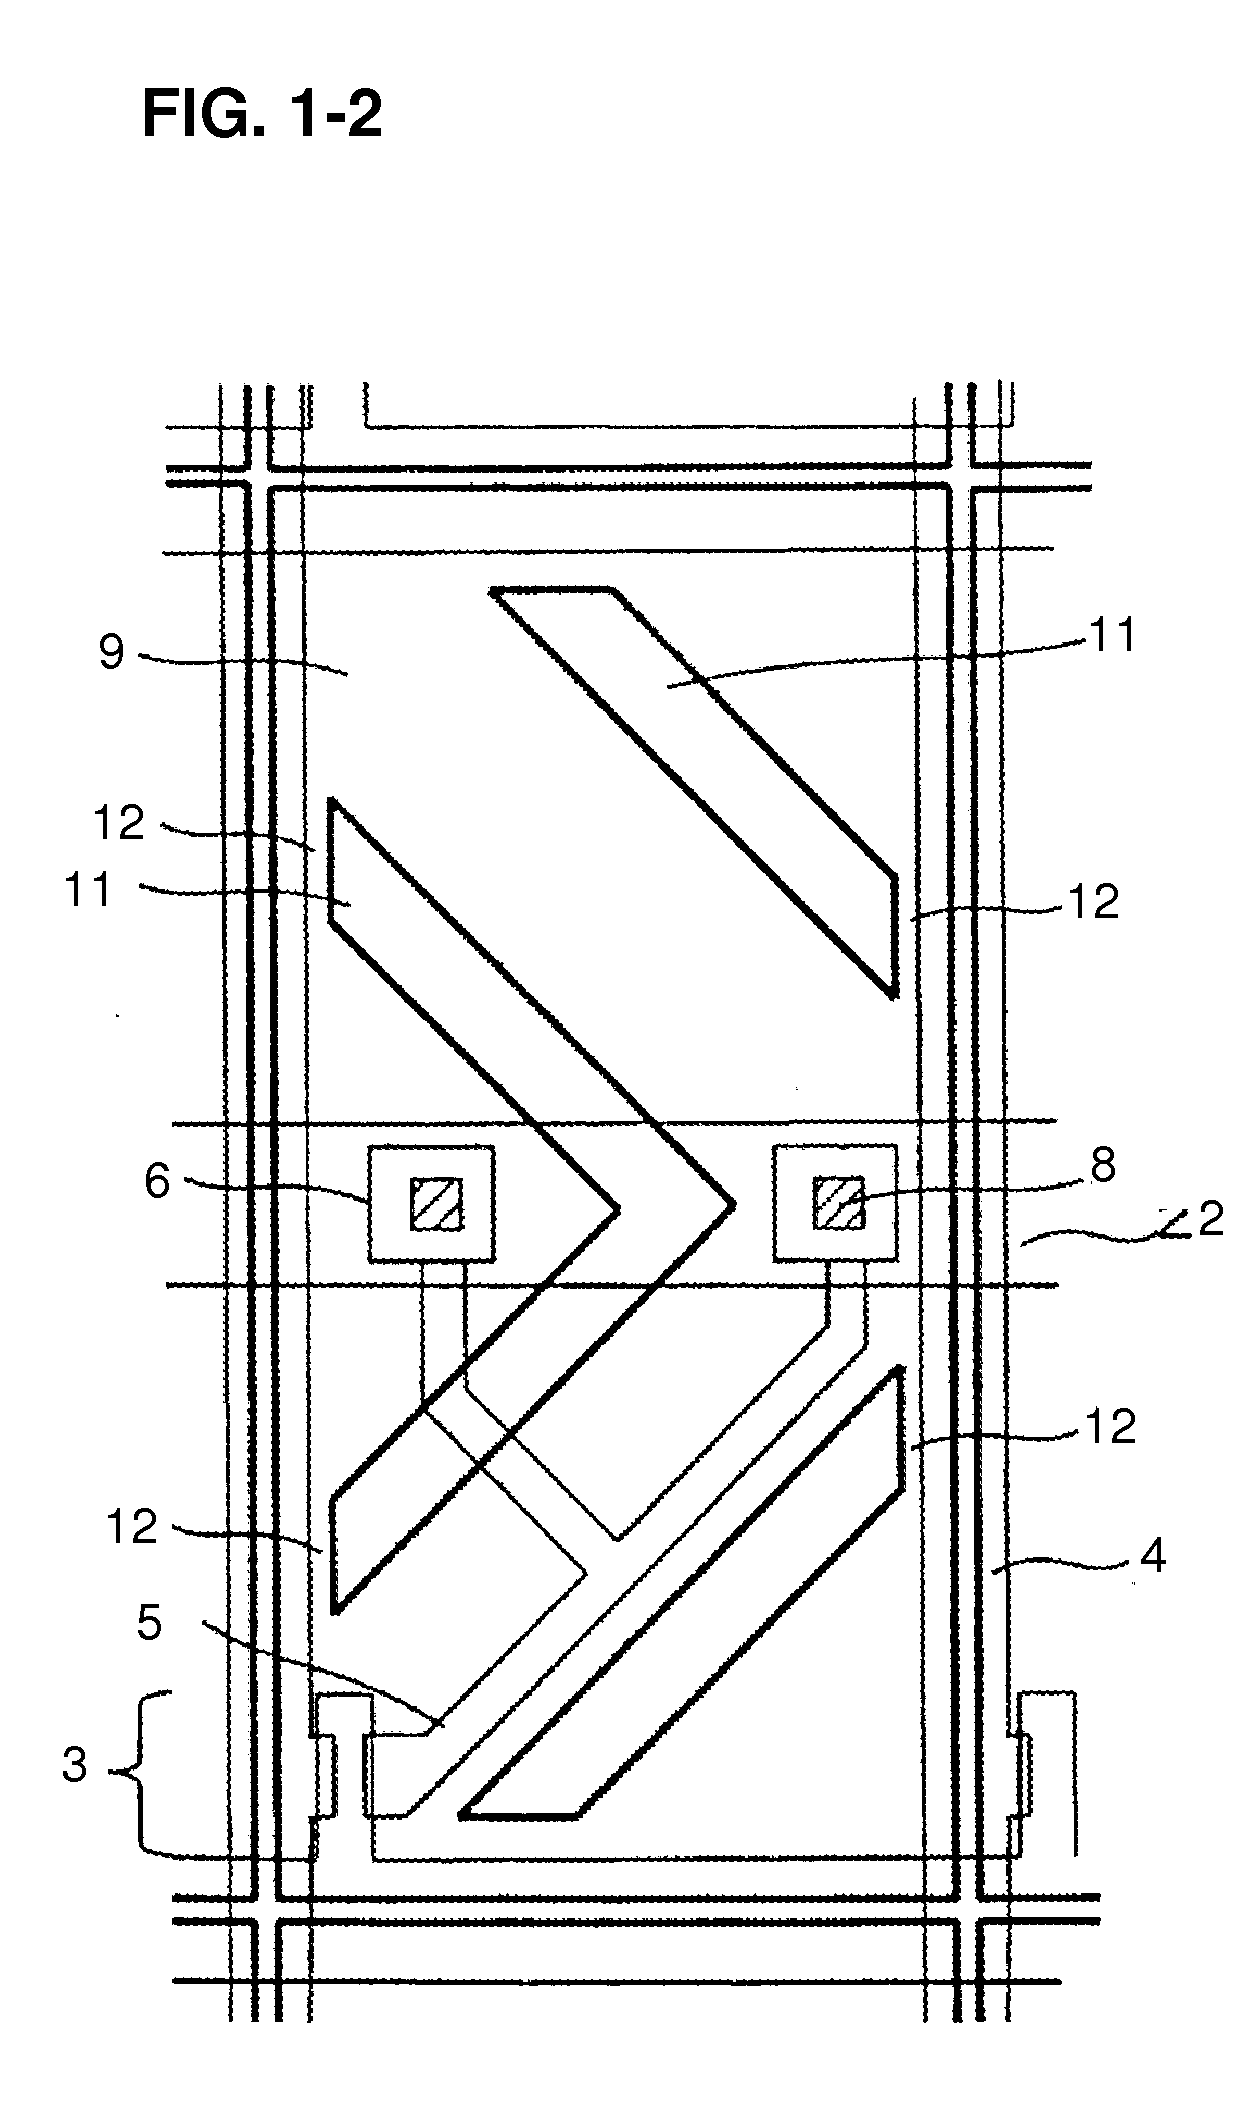 Substrate for a display device, a method for repairing the same, a method for repairing a display device and a liquid-crystal display device